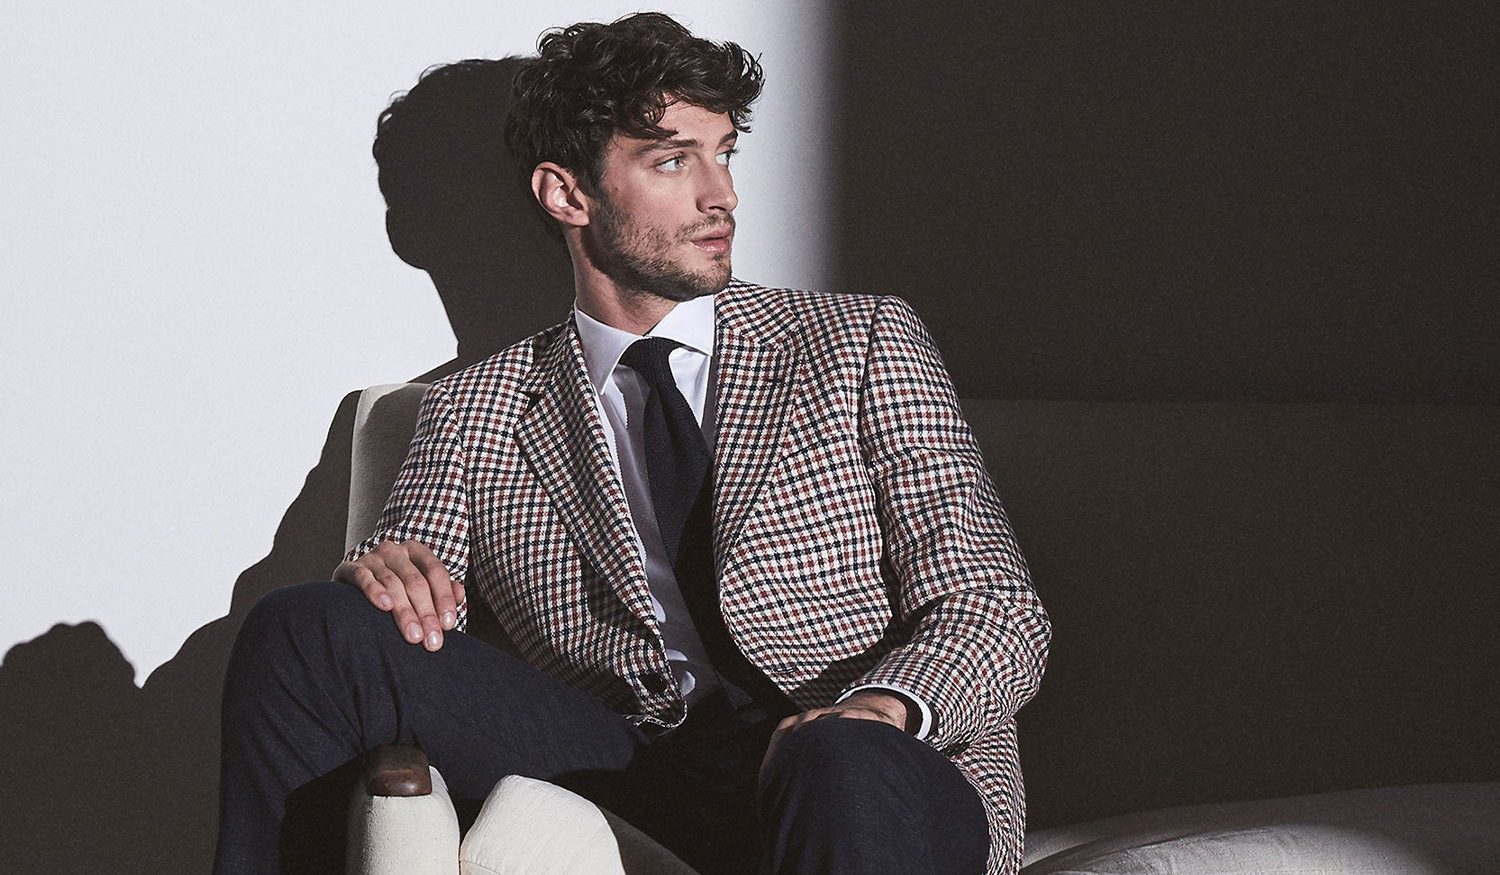 Men's Fall Wedding Attire: 5 Outfit Options for Guests